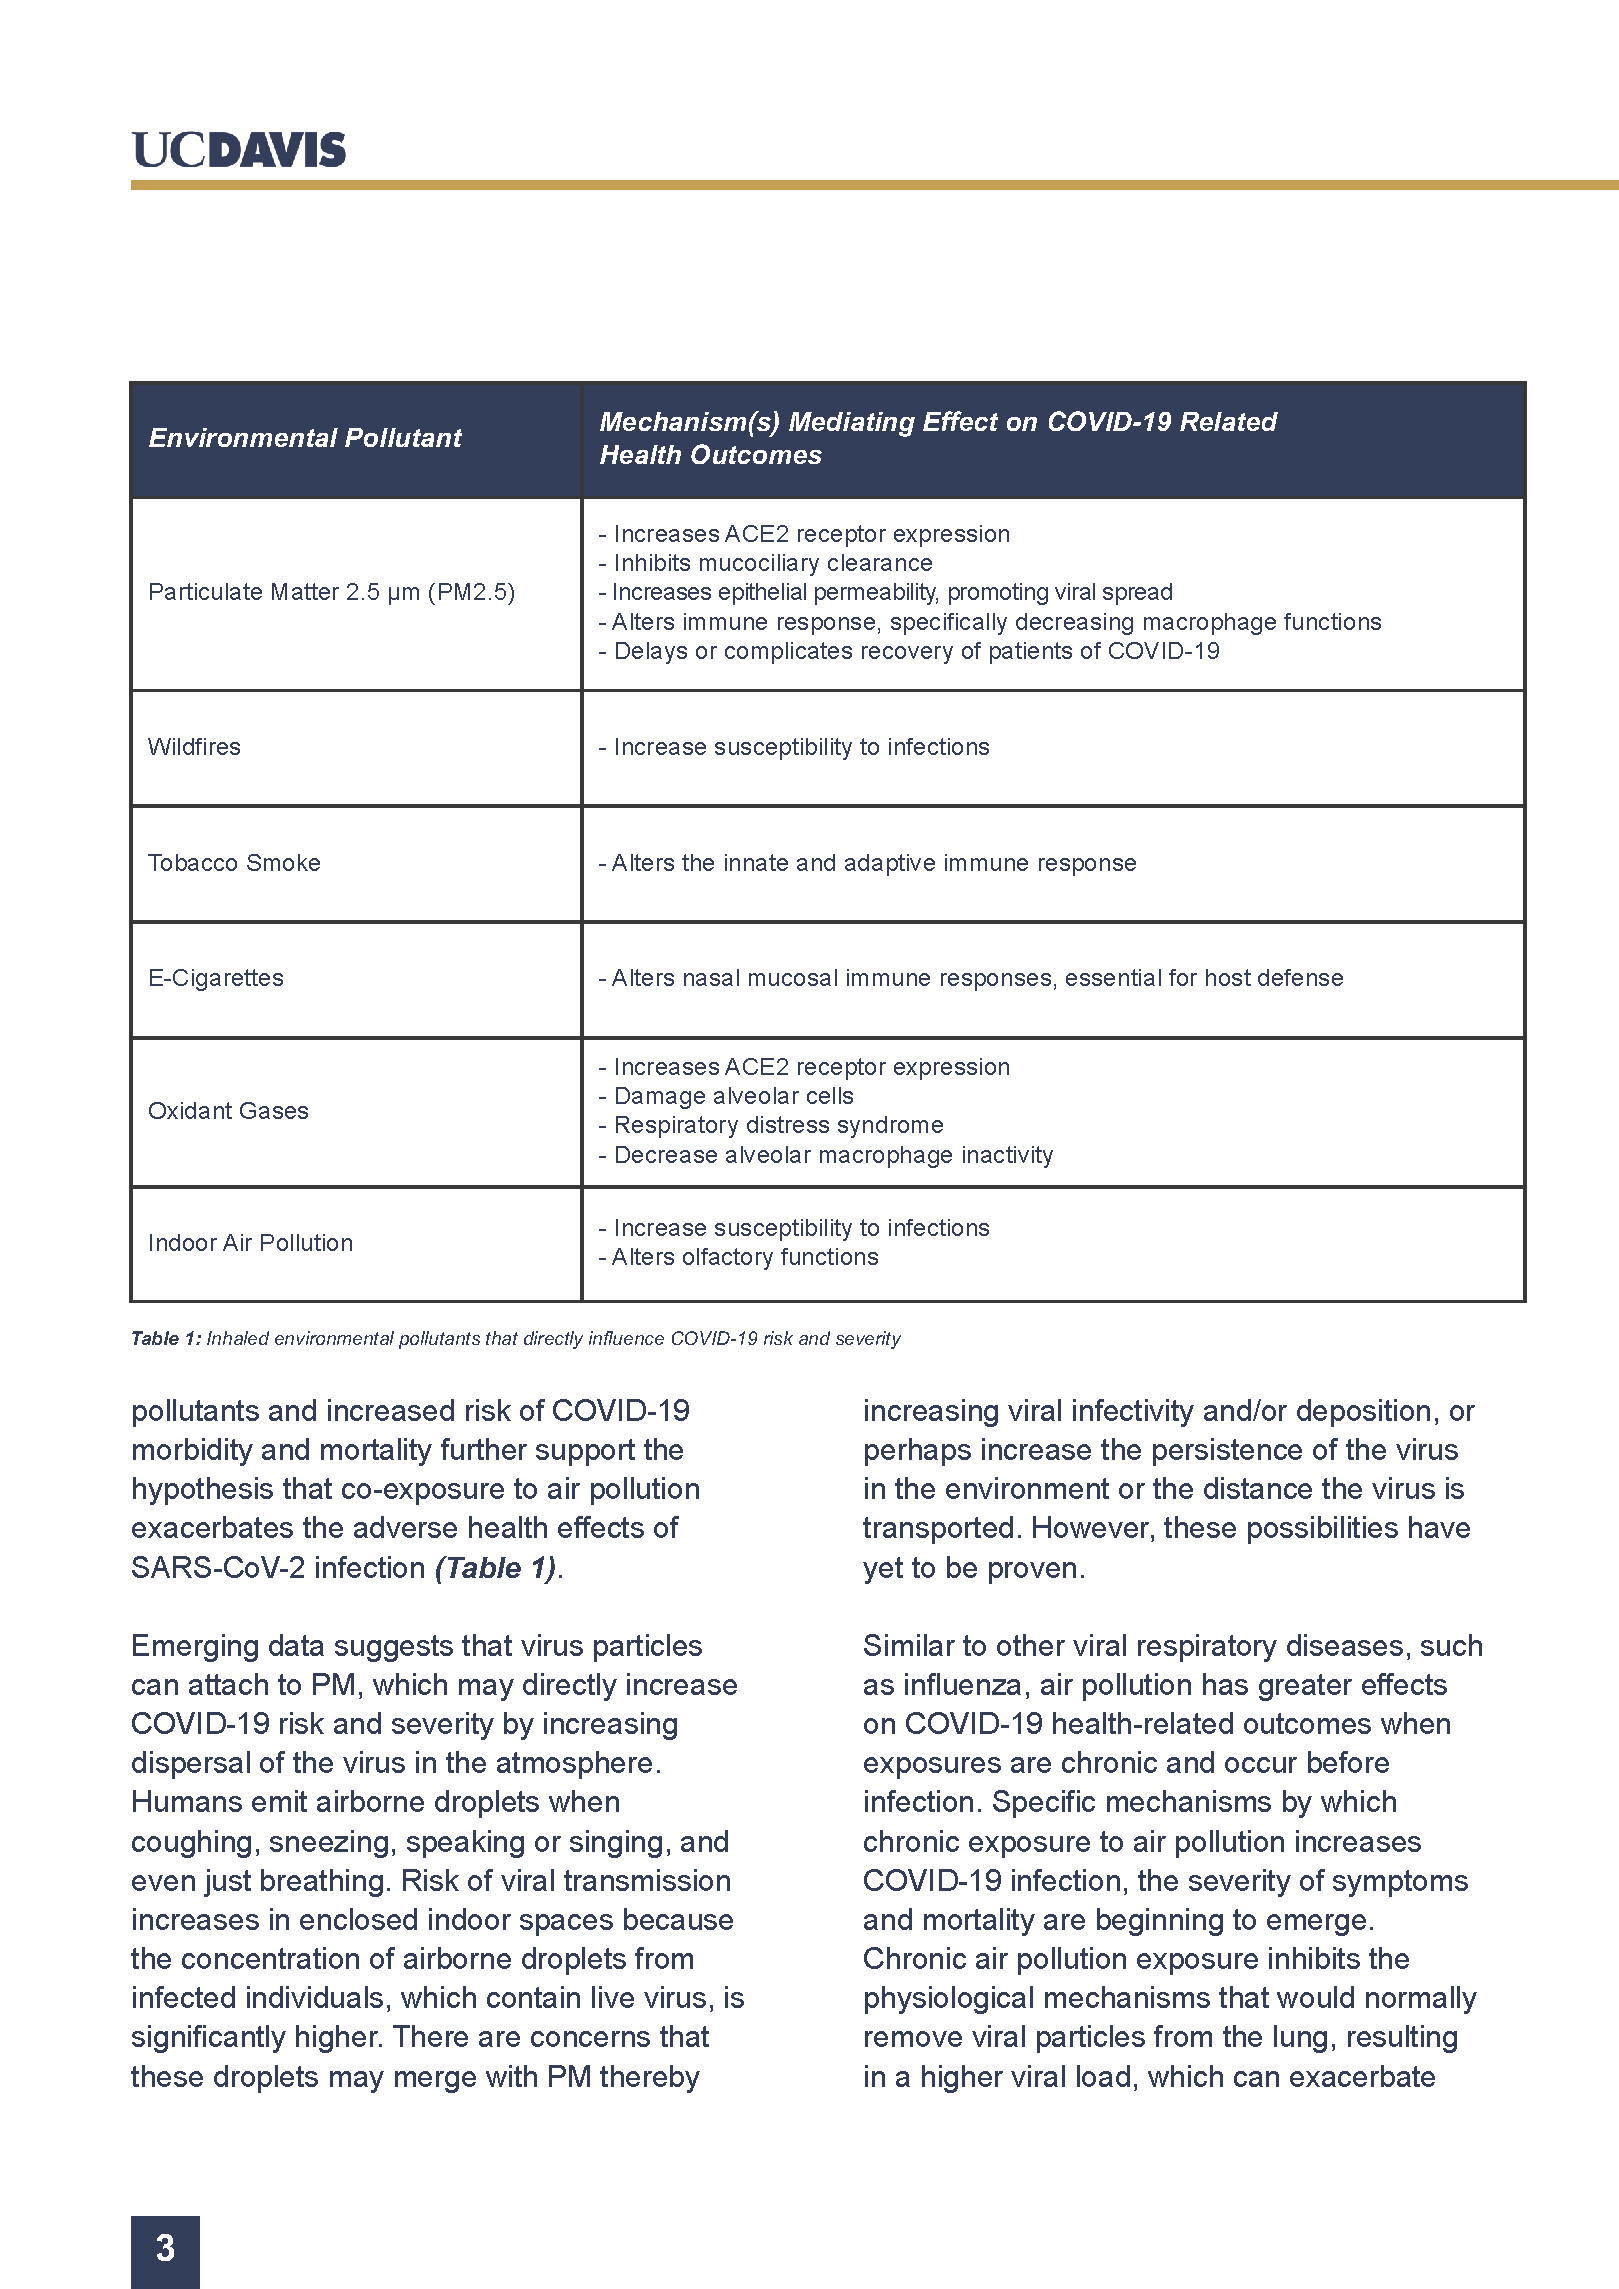 Climate change, EJ and COVID page 4